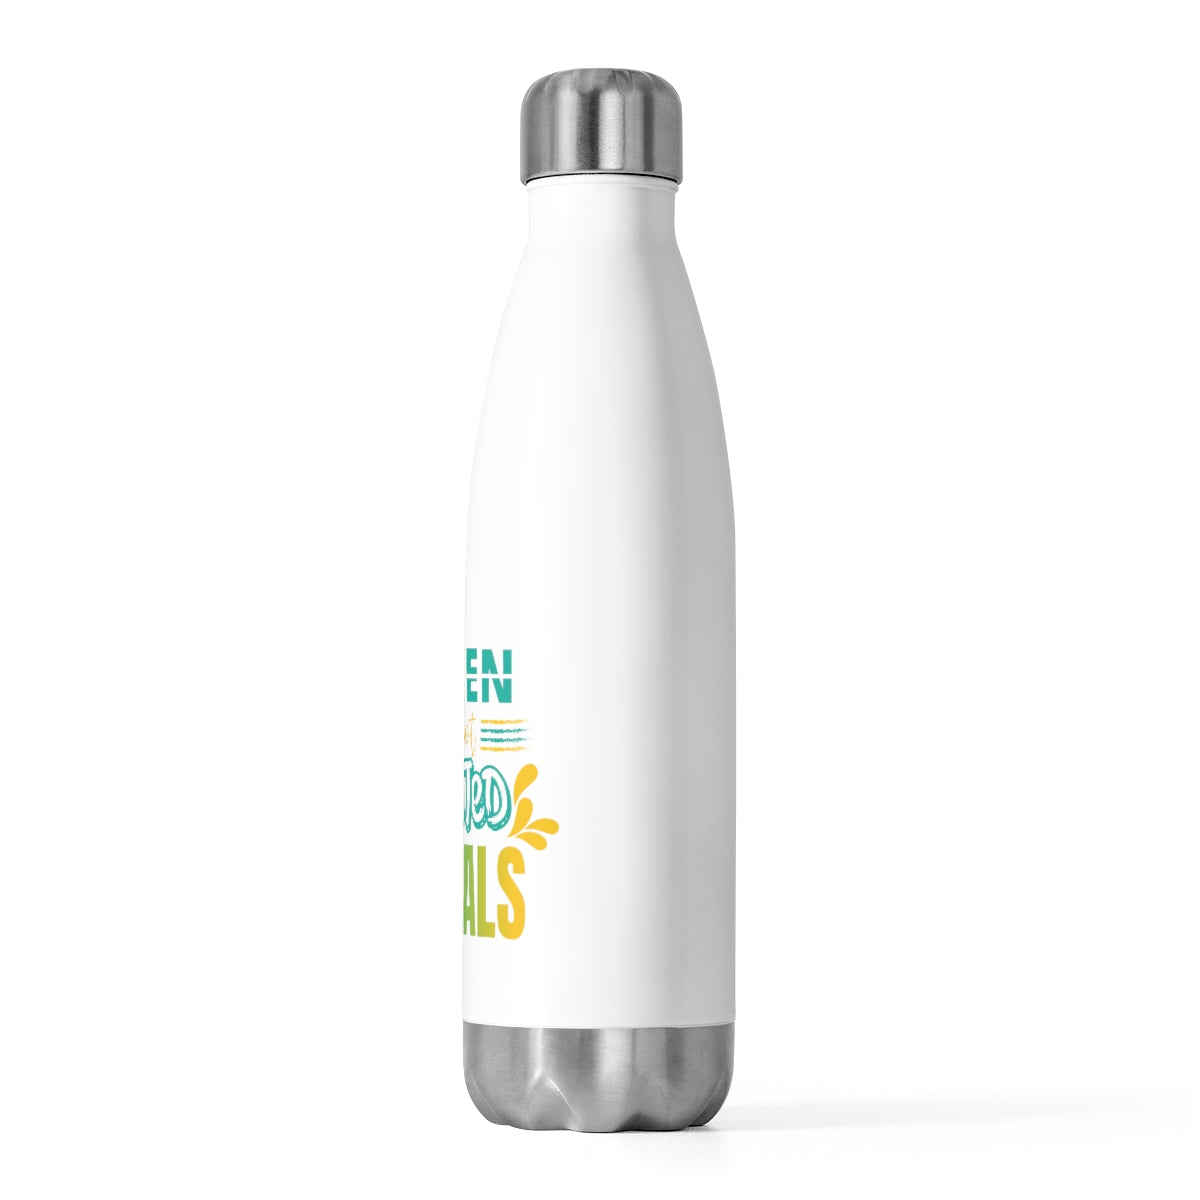 Broken but Not Defeated by My Trials Insulated Bottle Printify